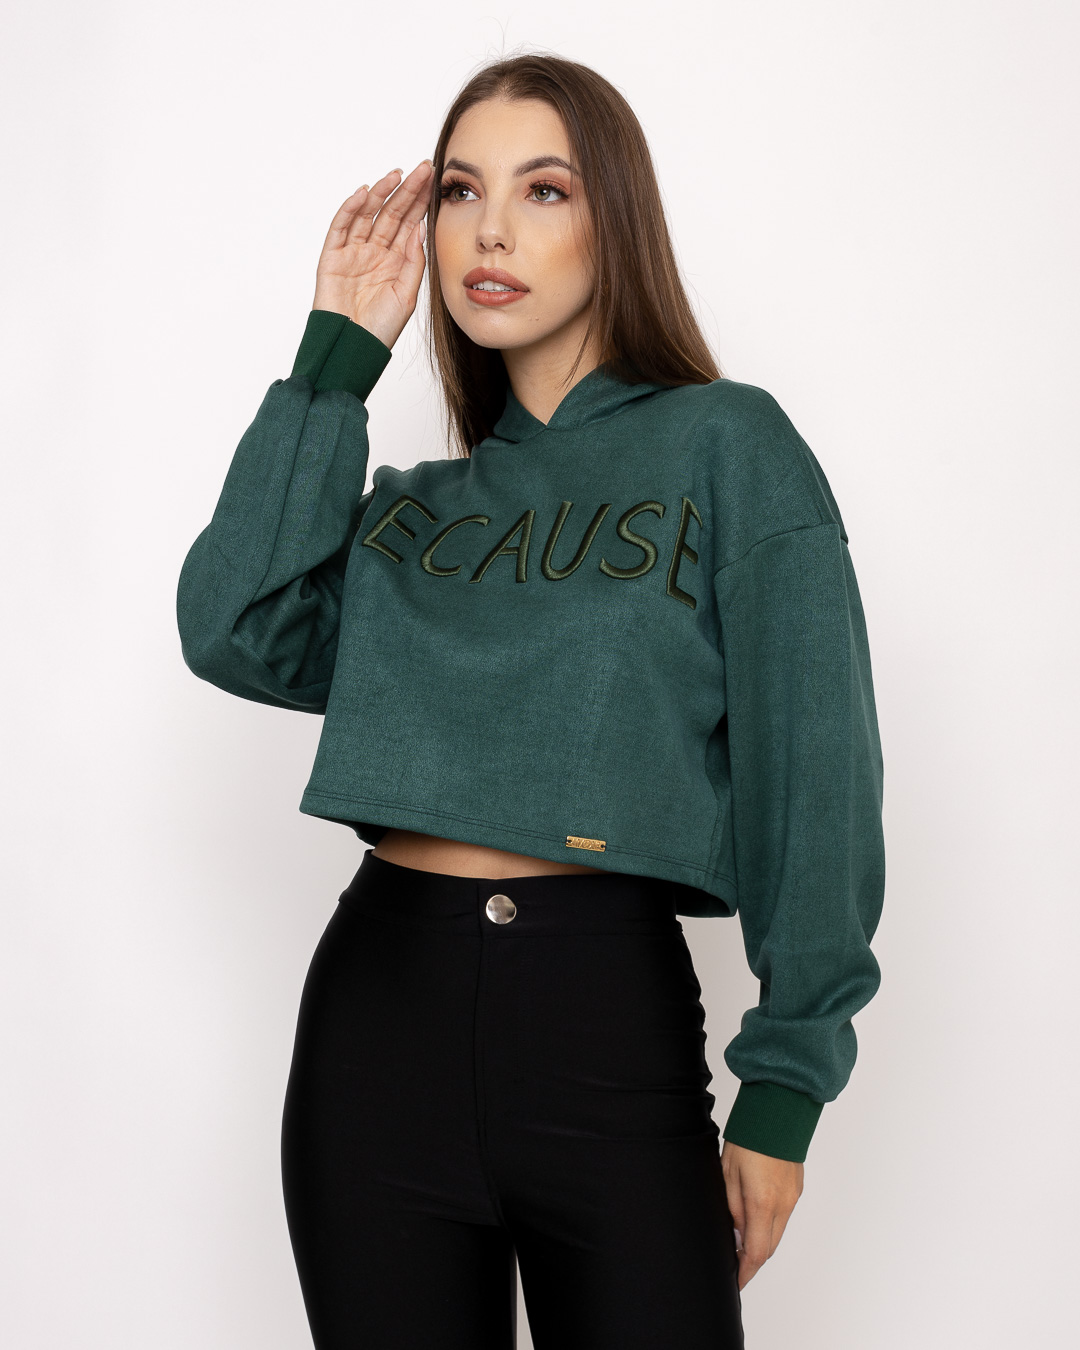 Limone - Shirt Limone Hooded Green 02-579 - 10009595